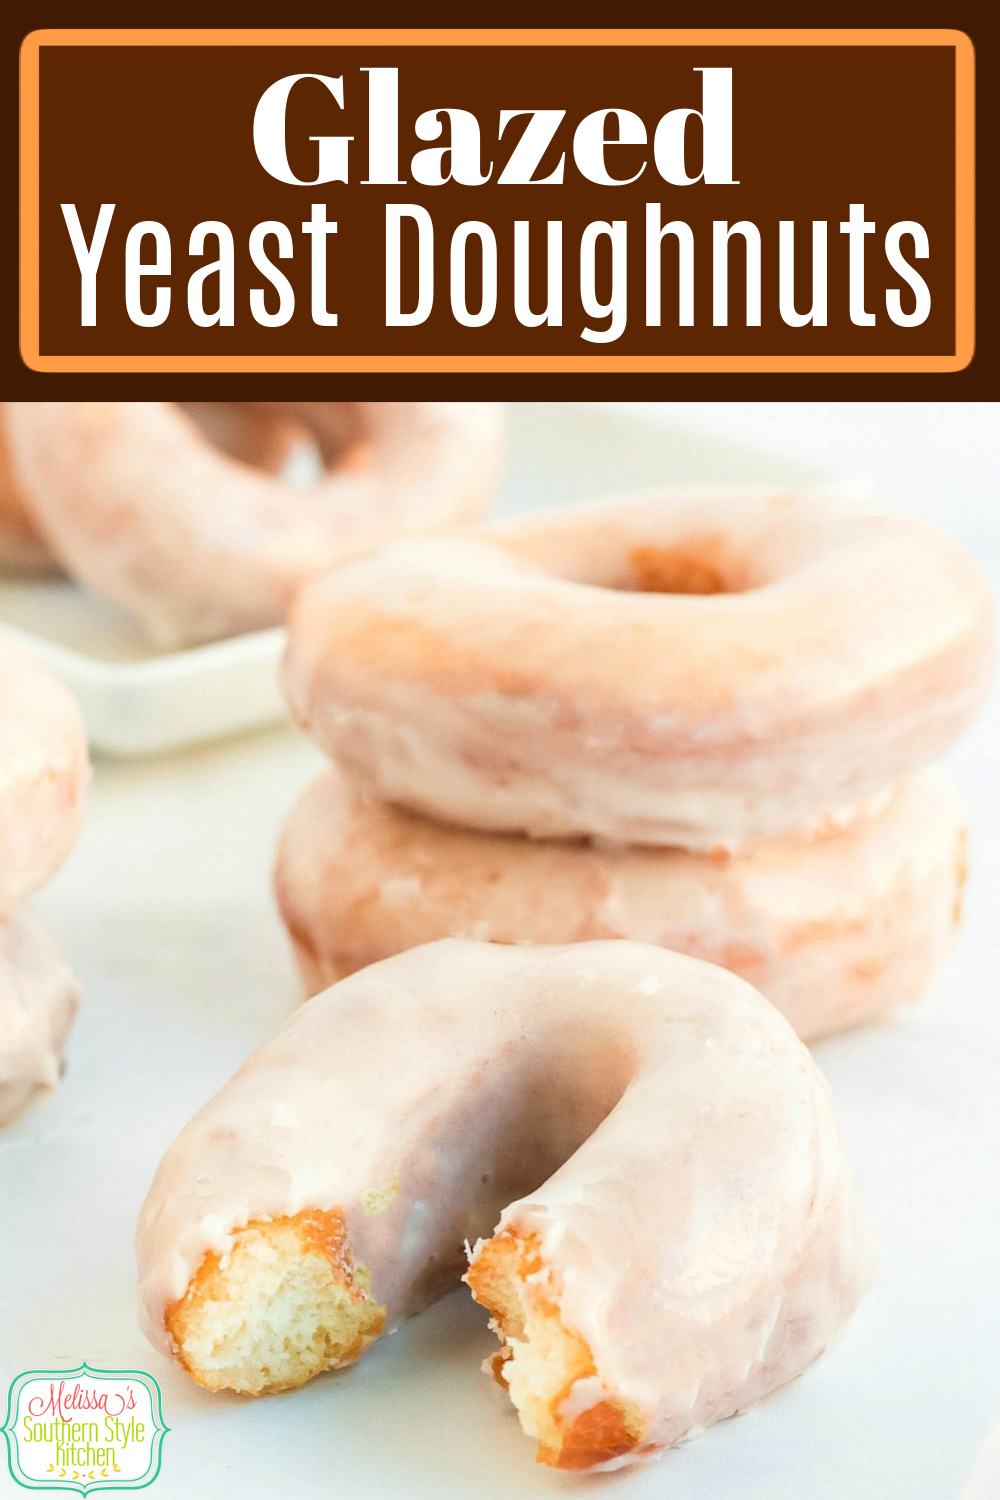 There's nothing like whipping-up a batch of homemade Glazed Yeast Doughnuts. Enjoy them for breakfast, brunch or dessert, anytime of day. #glazeddoughnuts #homemadeyeastdoughnuts #bestdonutrecipes #copycatkrispykreme #yeastdoughnuts #bestglazeddoughnuts #brunch #breakfast #desserts #dessertfoodrecipes #donuts #doughnuts #southernfood #southernrecipes via @melissasssk